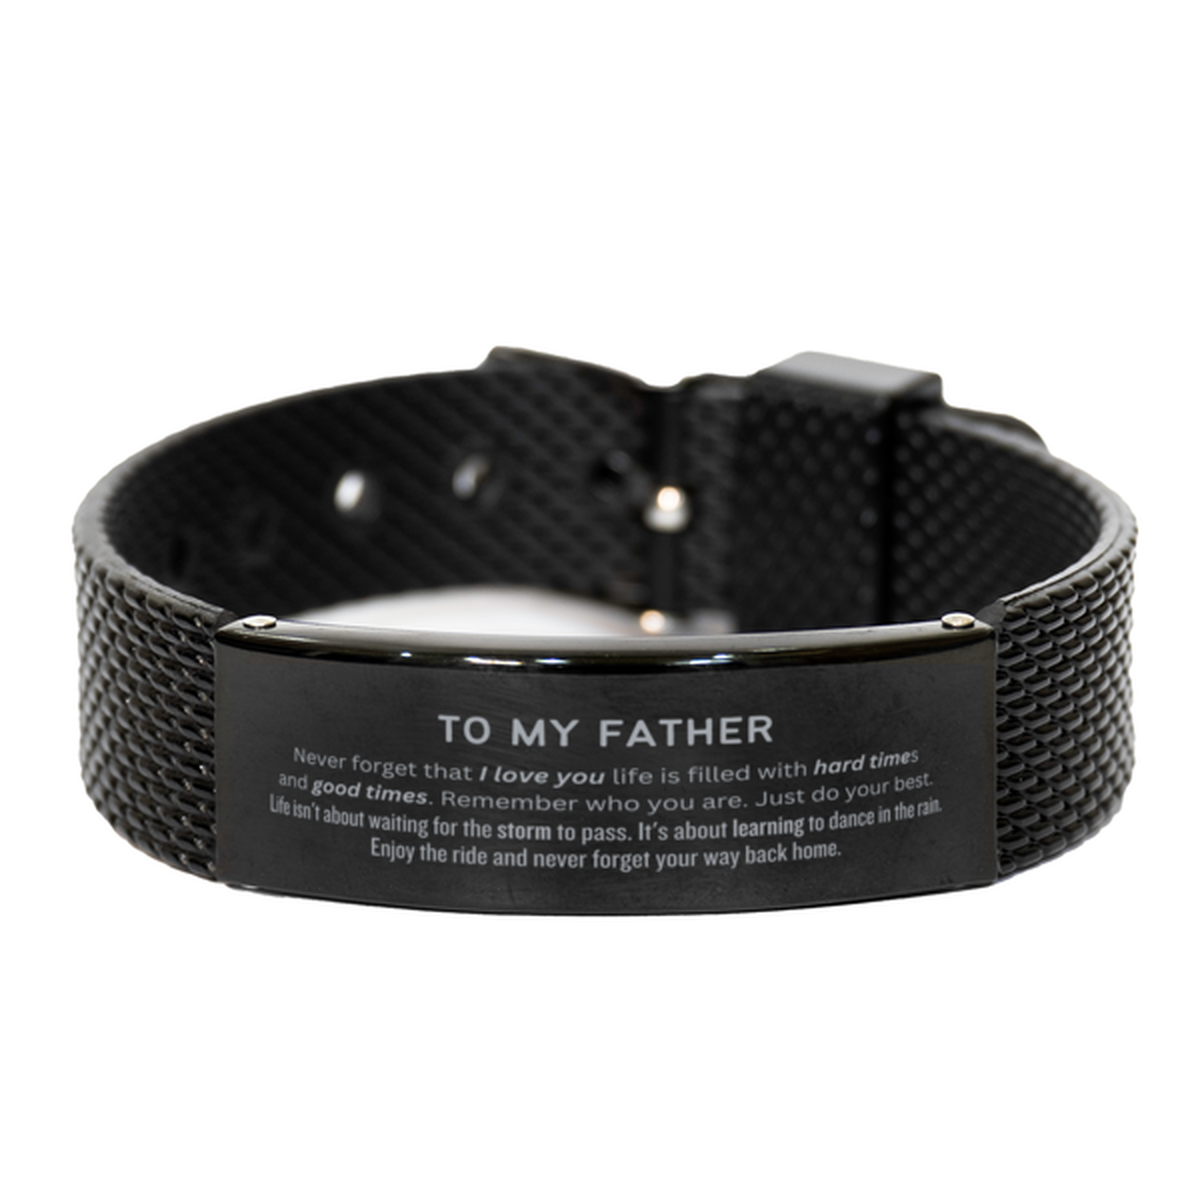 Christmas Father Black Shark Mesh Bracelet Gifts, To My Father Birthday Thank You Gifts For Father, Graduation Unique Gifts For Father To My Father Never forget that I love you life is filled with hard times and good times. Remember who you are. Just do y